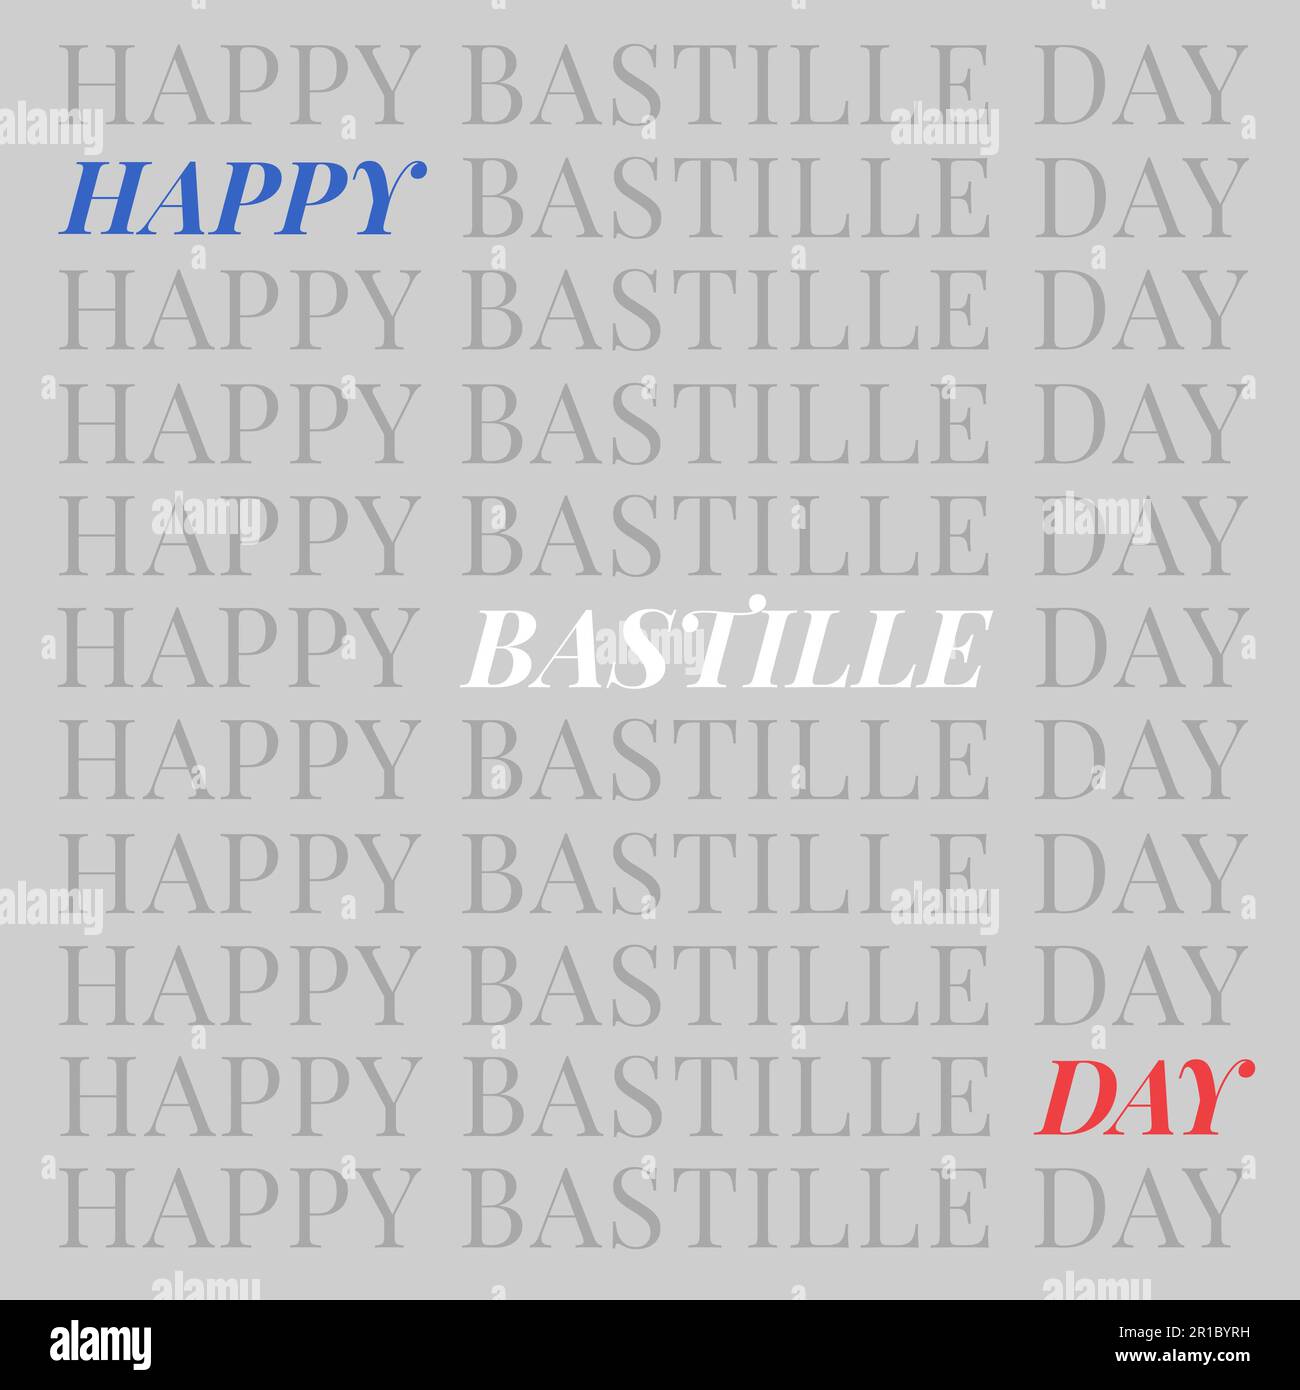 Composition of happy bastille day texts in repetition Stock Photo